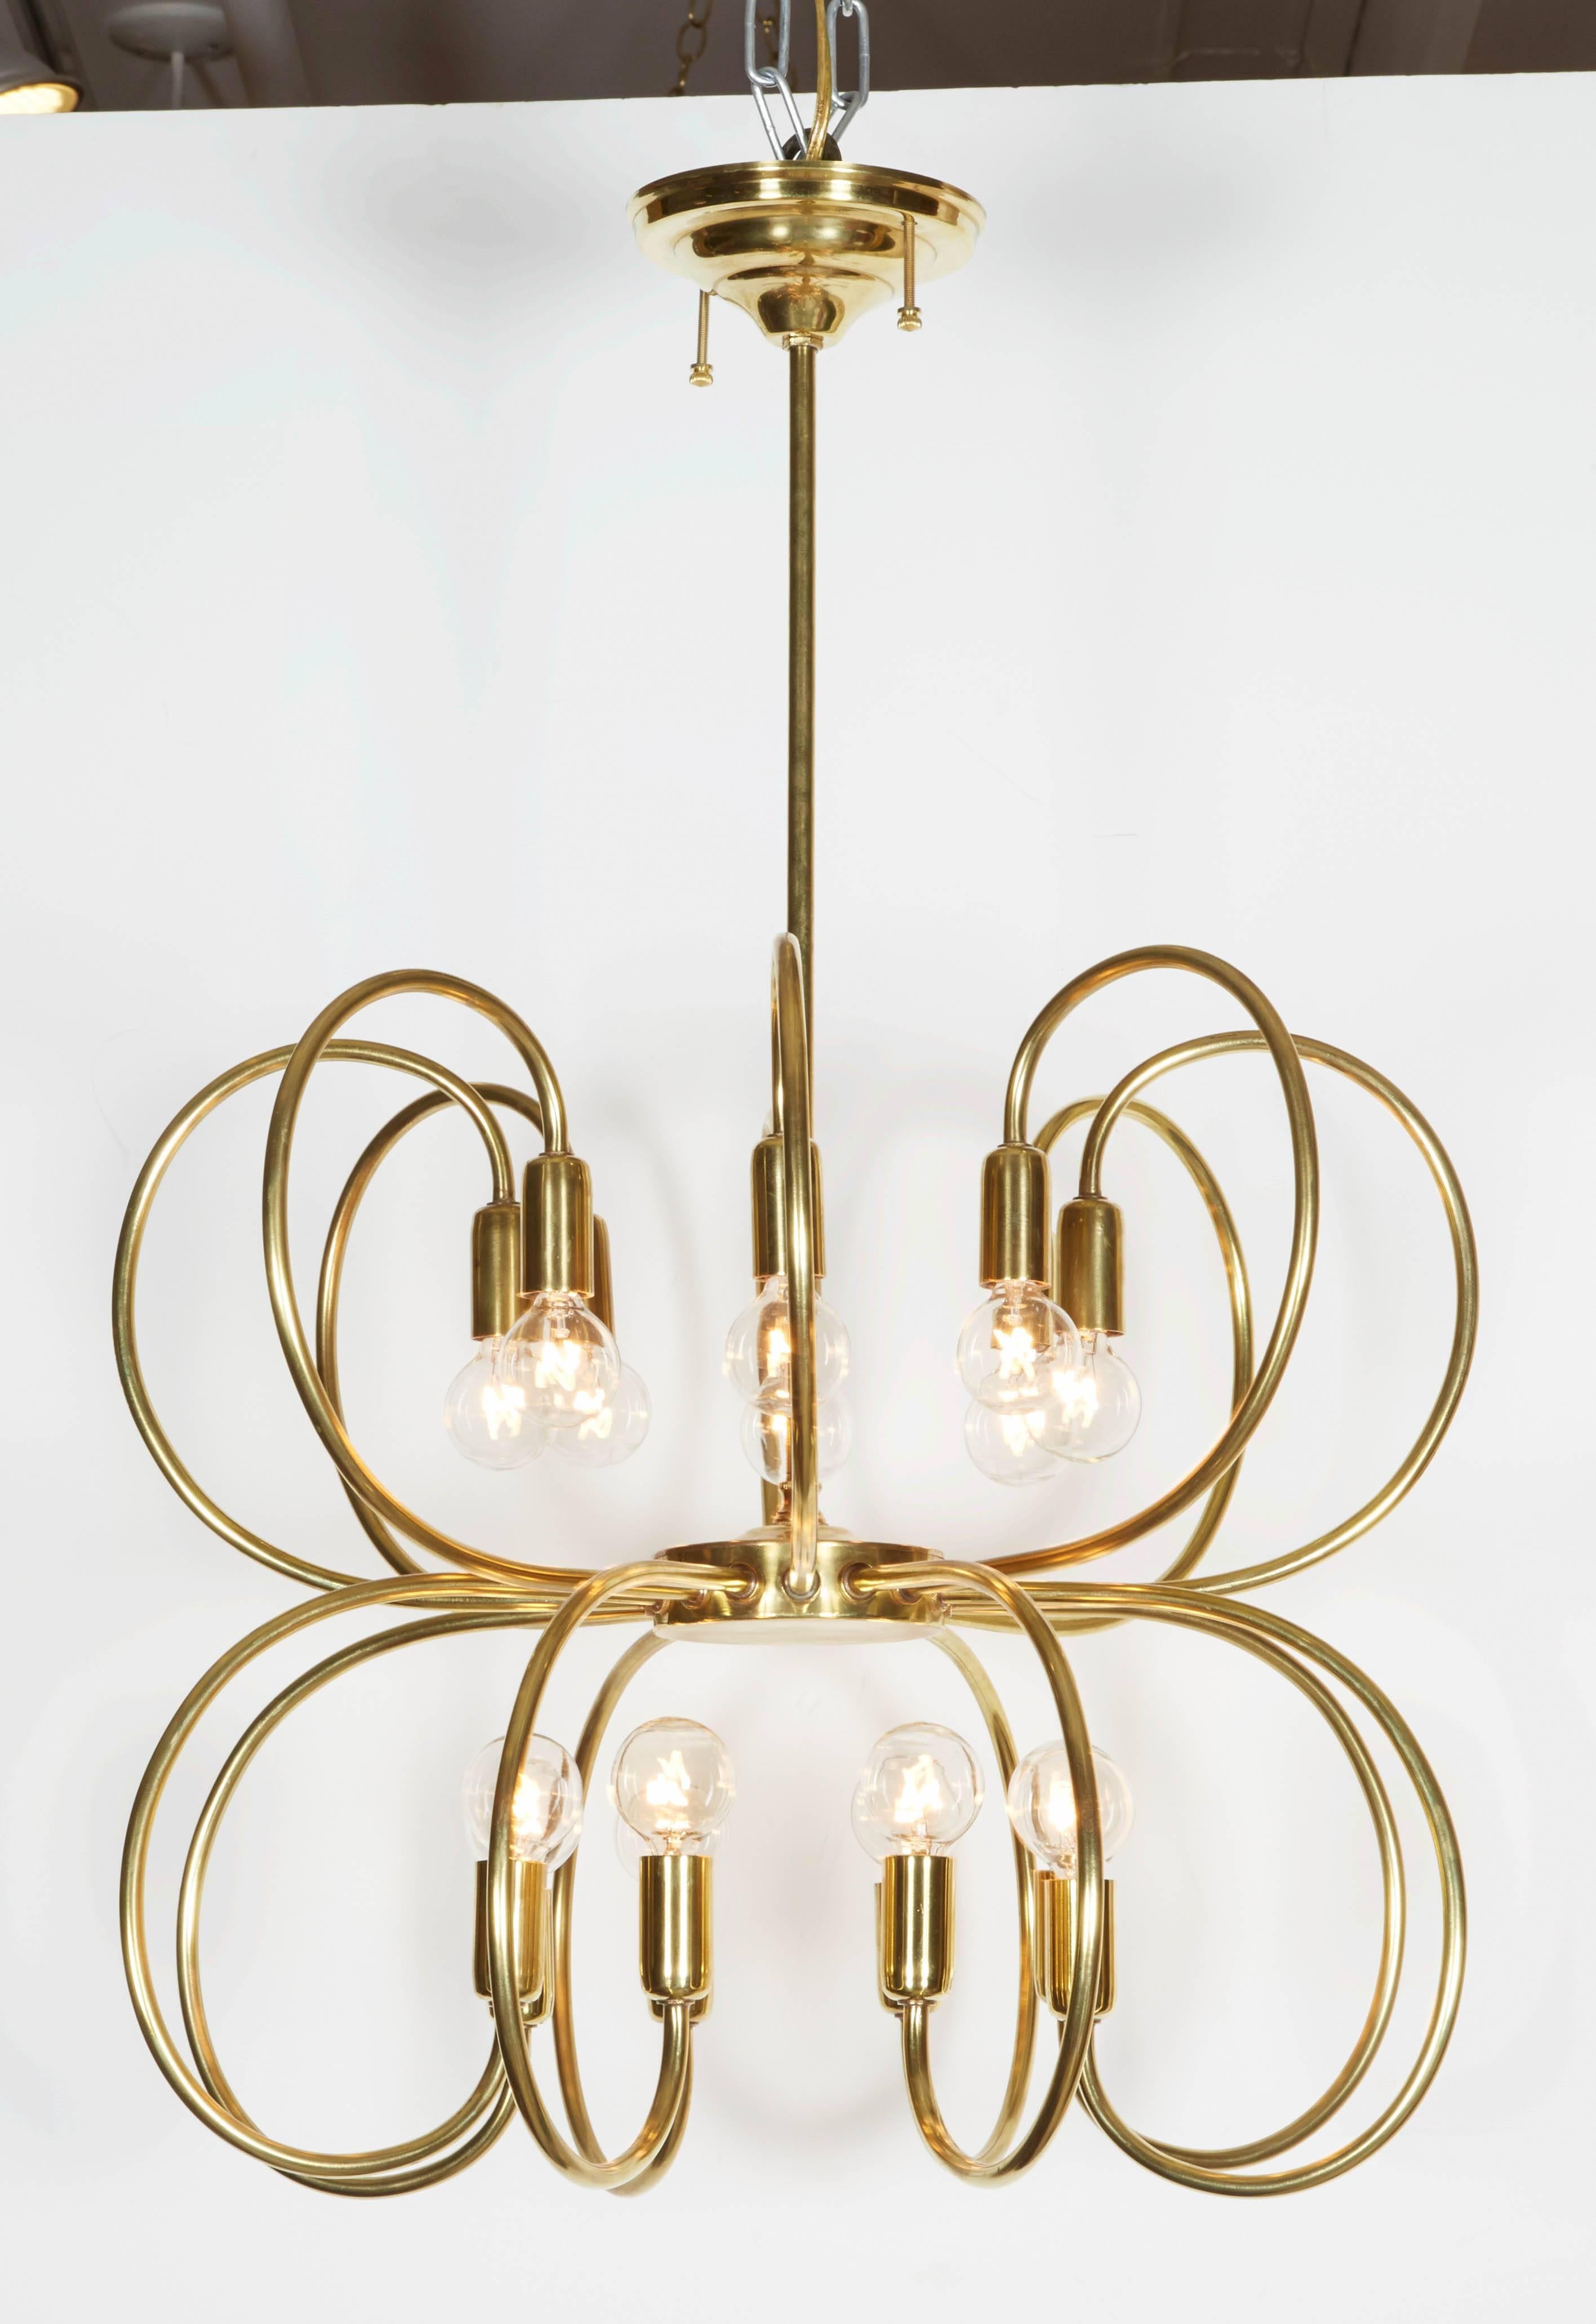 Gorgeous brass pendant chandelier comprised of two tiers of curved, brass arms. A fantastic statement piece in a versatile scale. Please contact for location. Offered by Las Venus by Kenneth Clark, New York City.
     